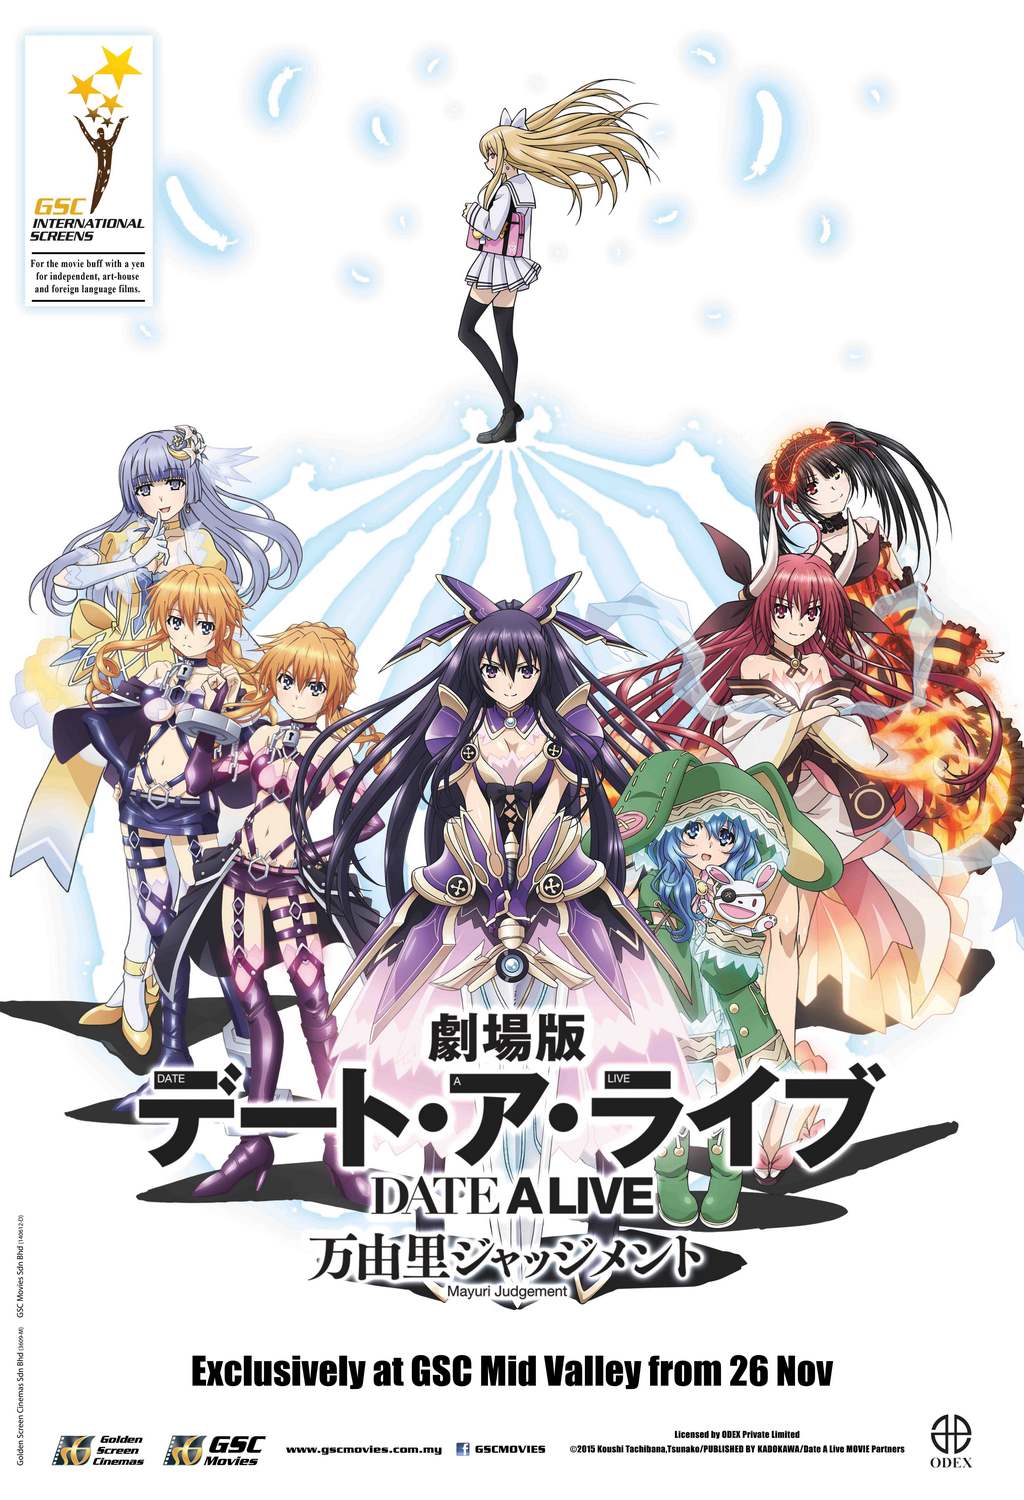 Date A Live - Official Trailer (In Cinemas 26 November 2015) 